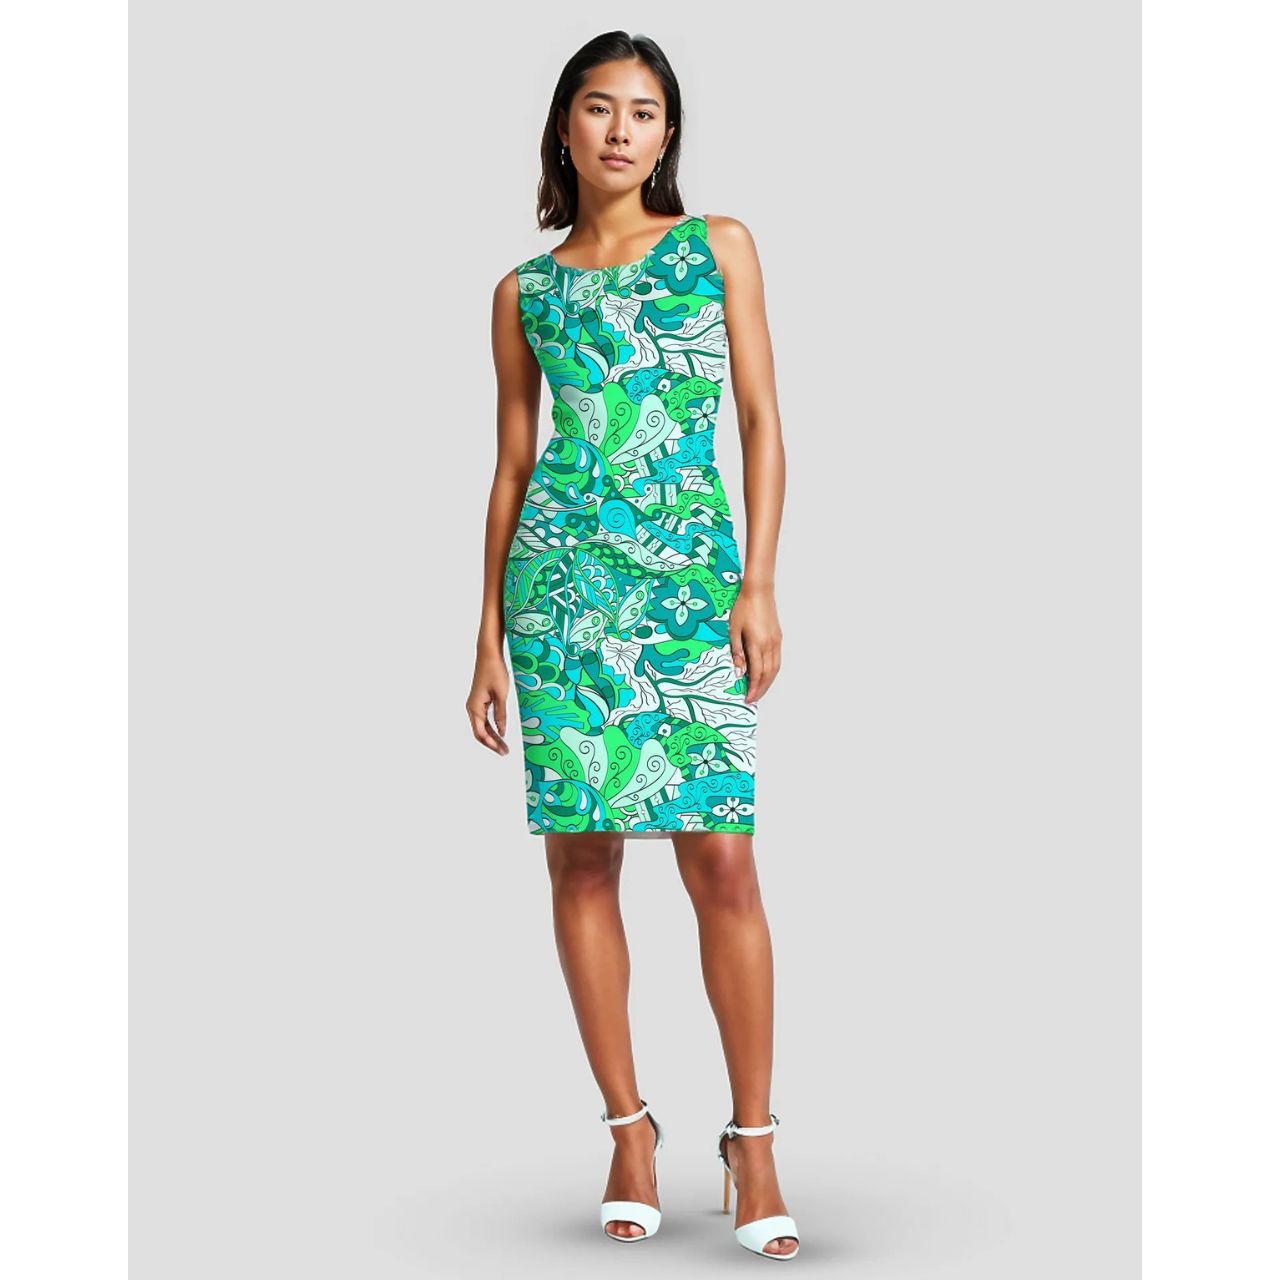 Umibe sleeveless above knee-length cocktail sheath dress botanical psychedelic abstract floral paisley swirls retro Designer Print Blue Green Round Neck Form fitted bodycon Blissfully Brand